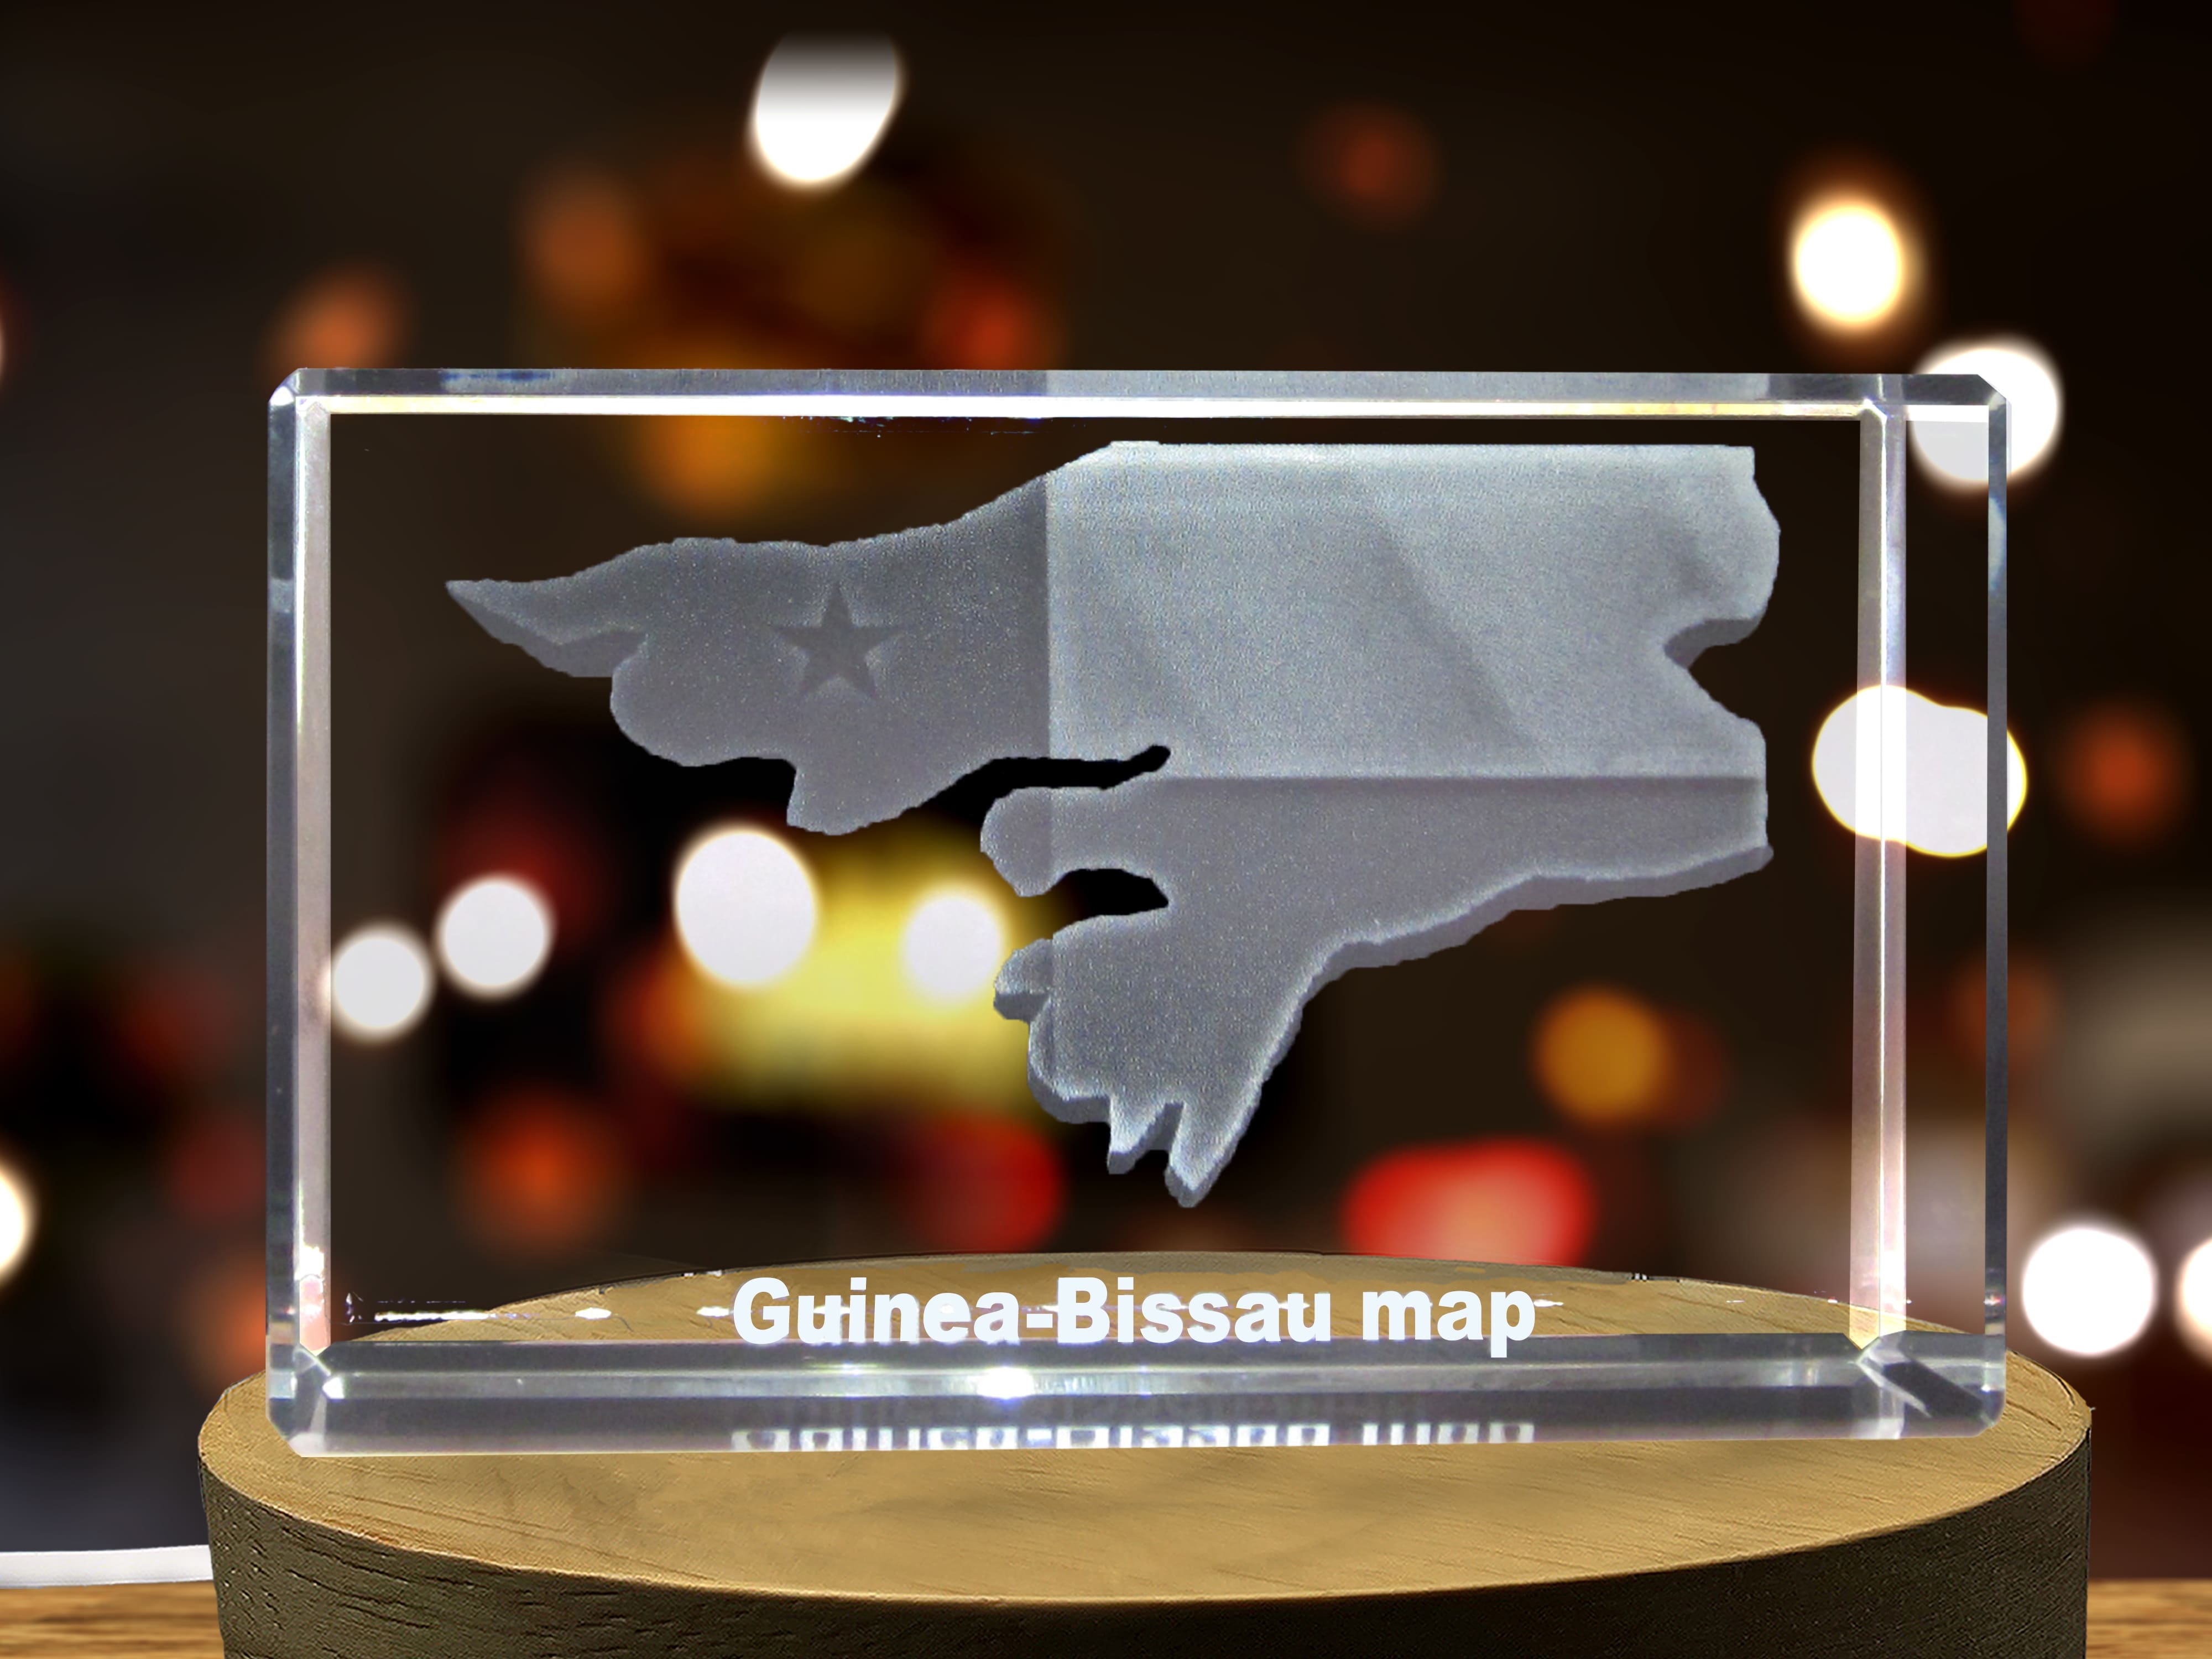 Guinea-Bissau 3D Engraved Crystal 3D Engraved Crystal Keepsake/Gift/Decor/Collectible/Souvenir A&B Crystal Collection